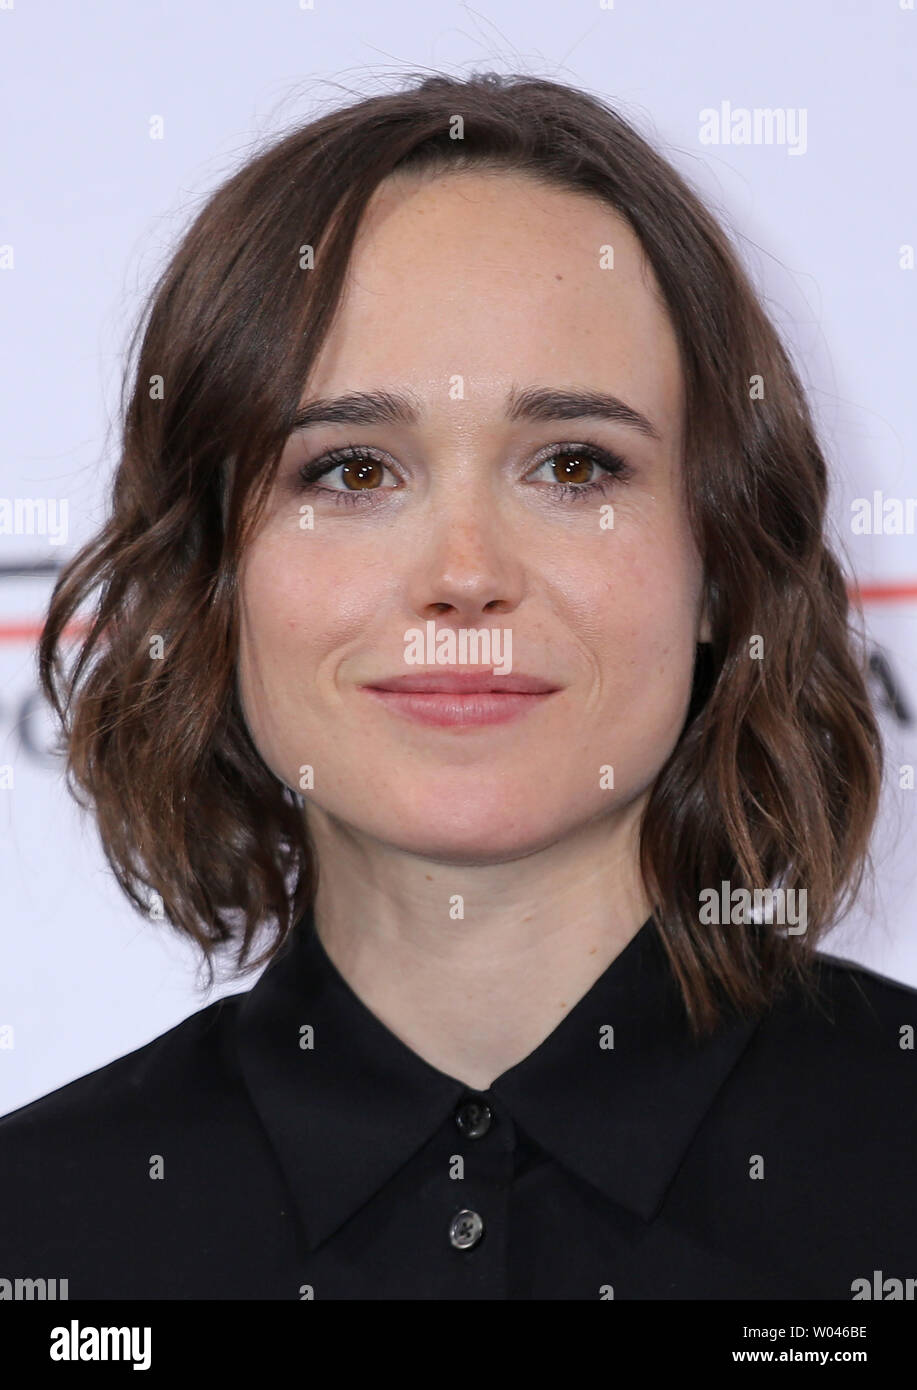 Ellen Page arrives at a photo call for the film "Freeheld" during the 10th  annual Rome International Film Festival in Rome on October 18, 2015.  UPI/David Silpa Stock Photo - Alamy